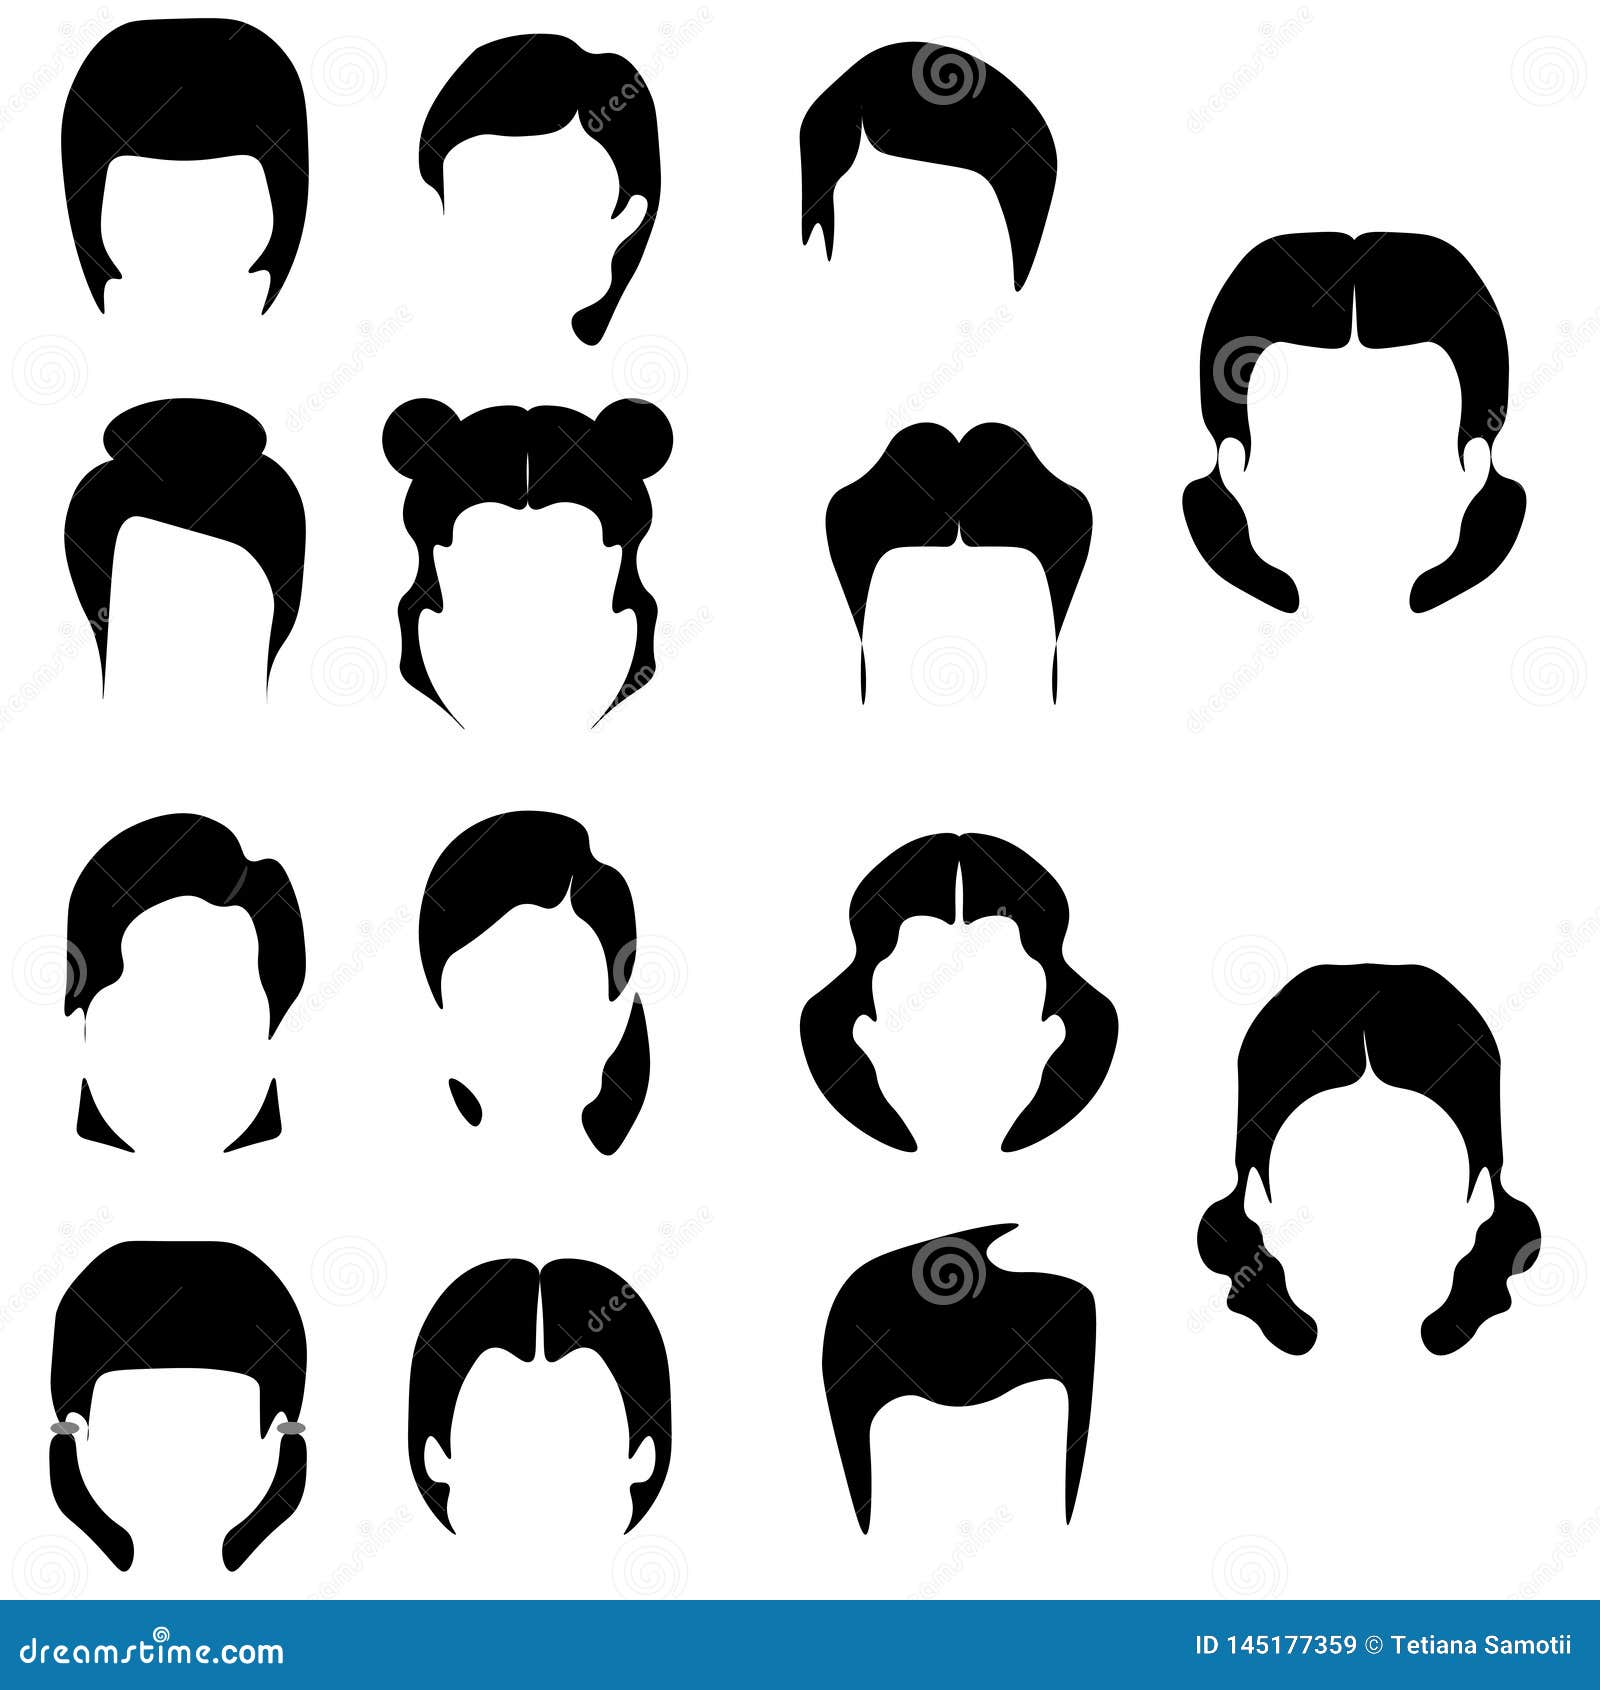 Web Women Hairstyle Wigs False and Natural Hair Pieces Front and Back View  Black Icons Collection Isolated Vector Illustration Stock Illustration -  Illustration of background, haircut: 145177359